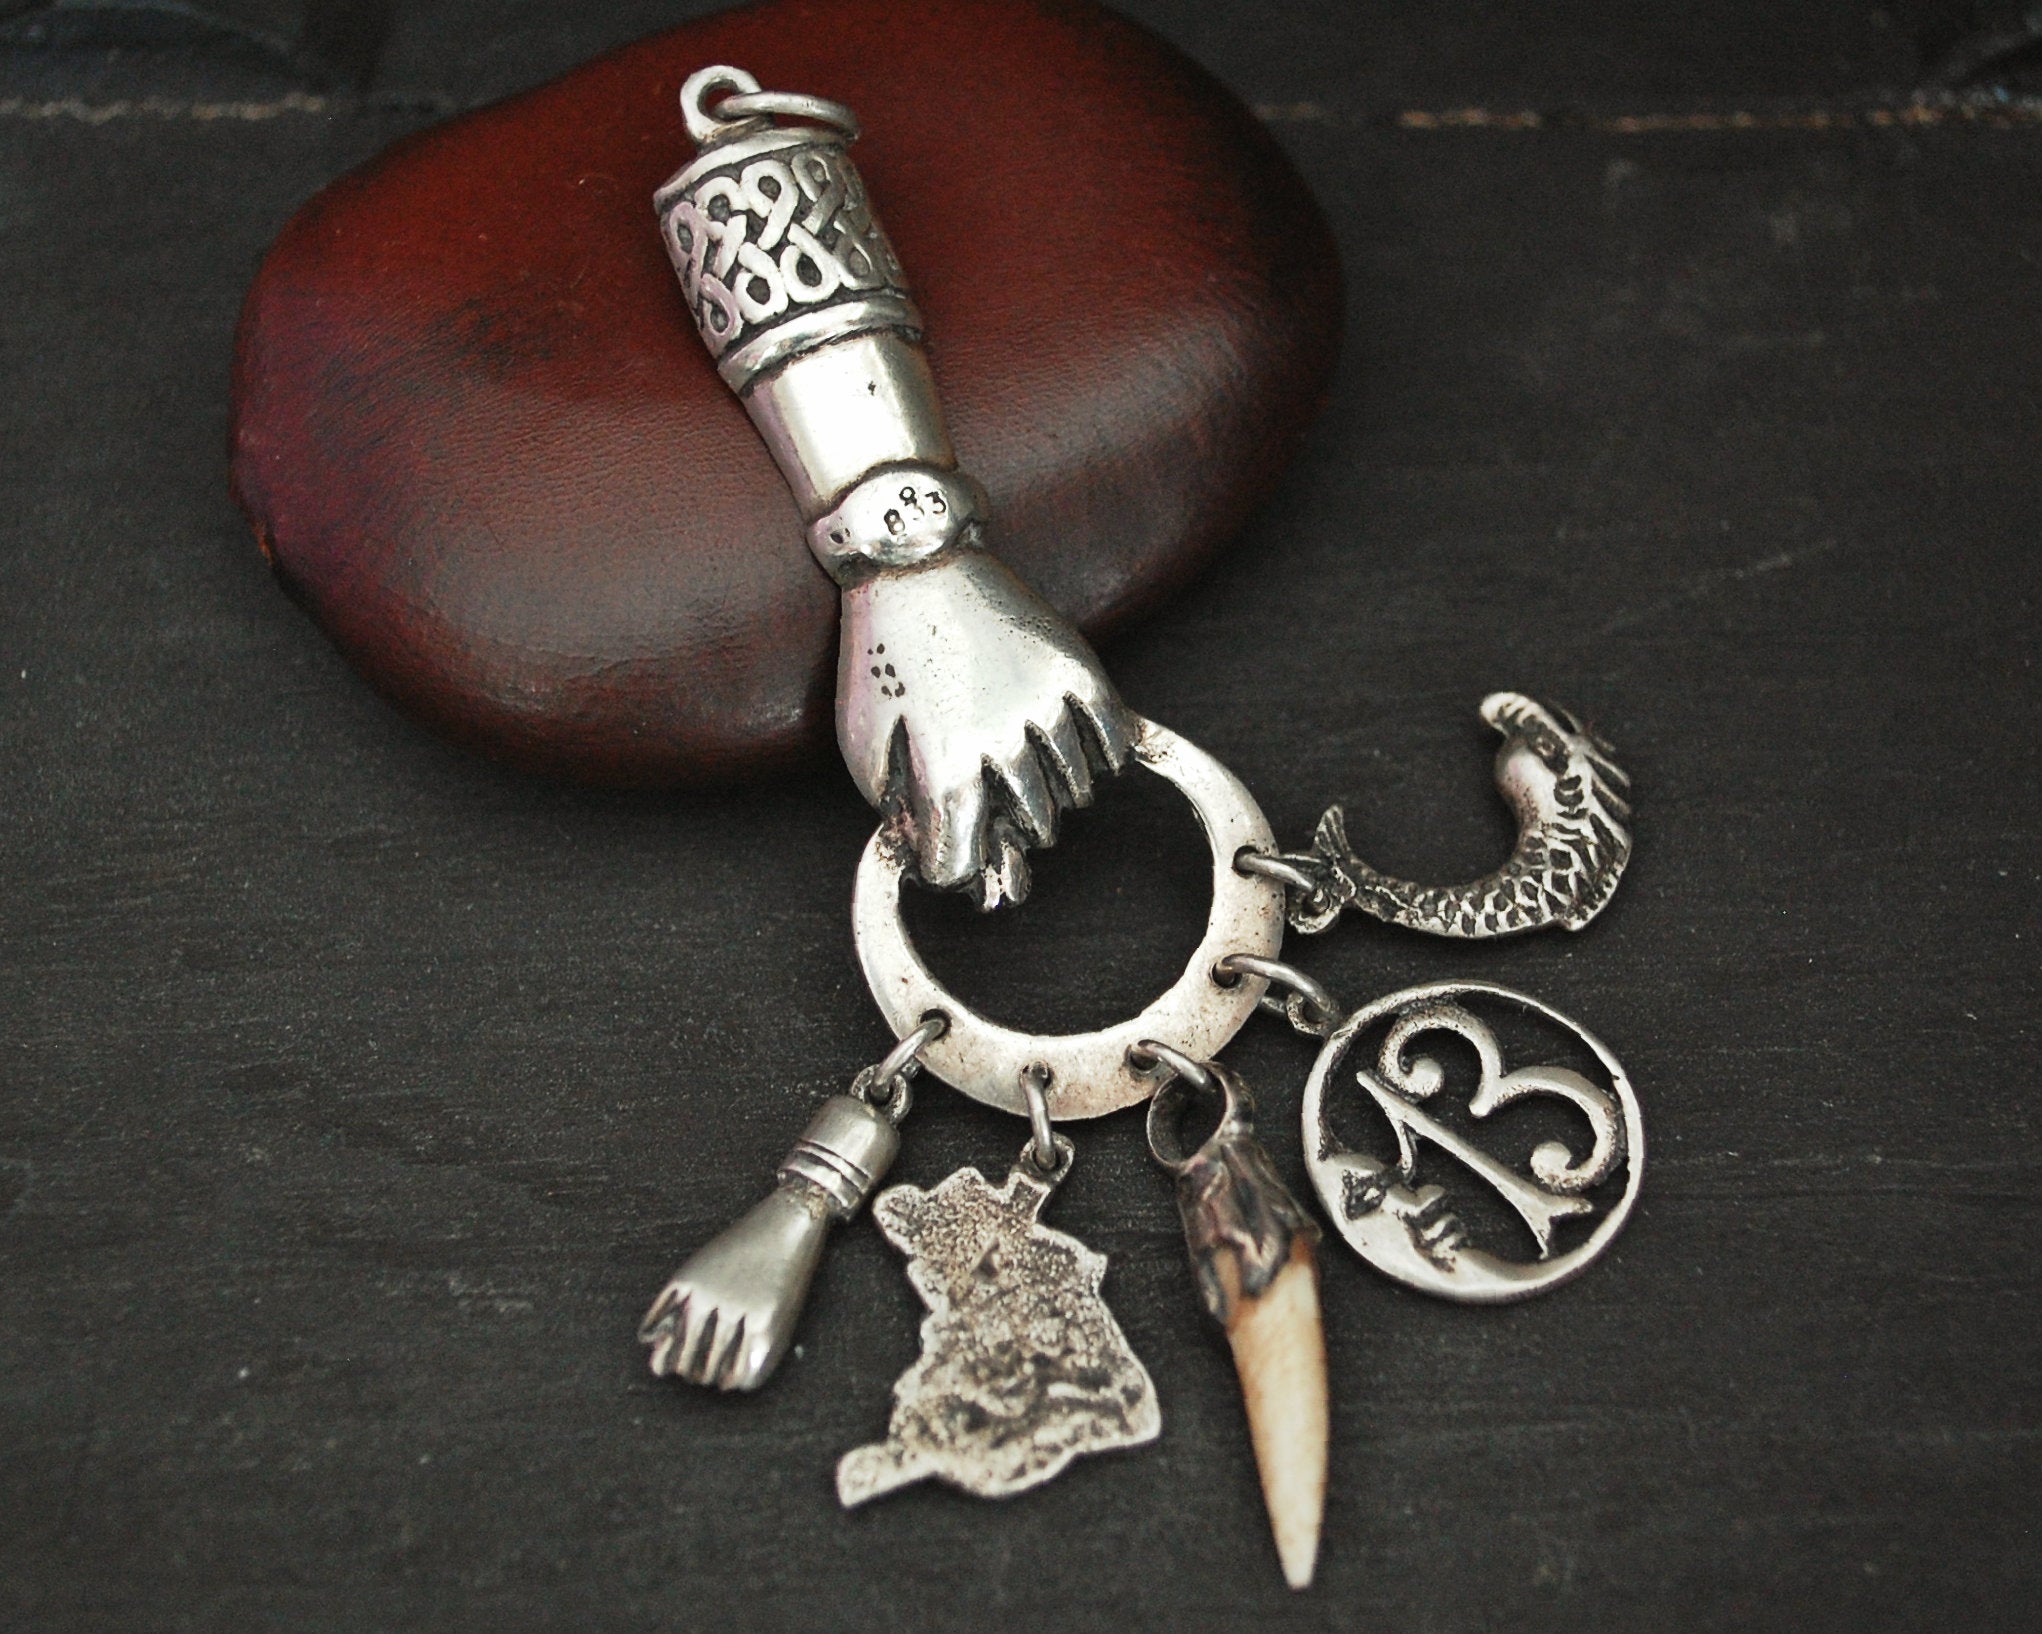 Figa Hand Lucky Charms Amulet